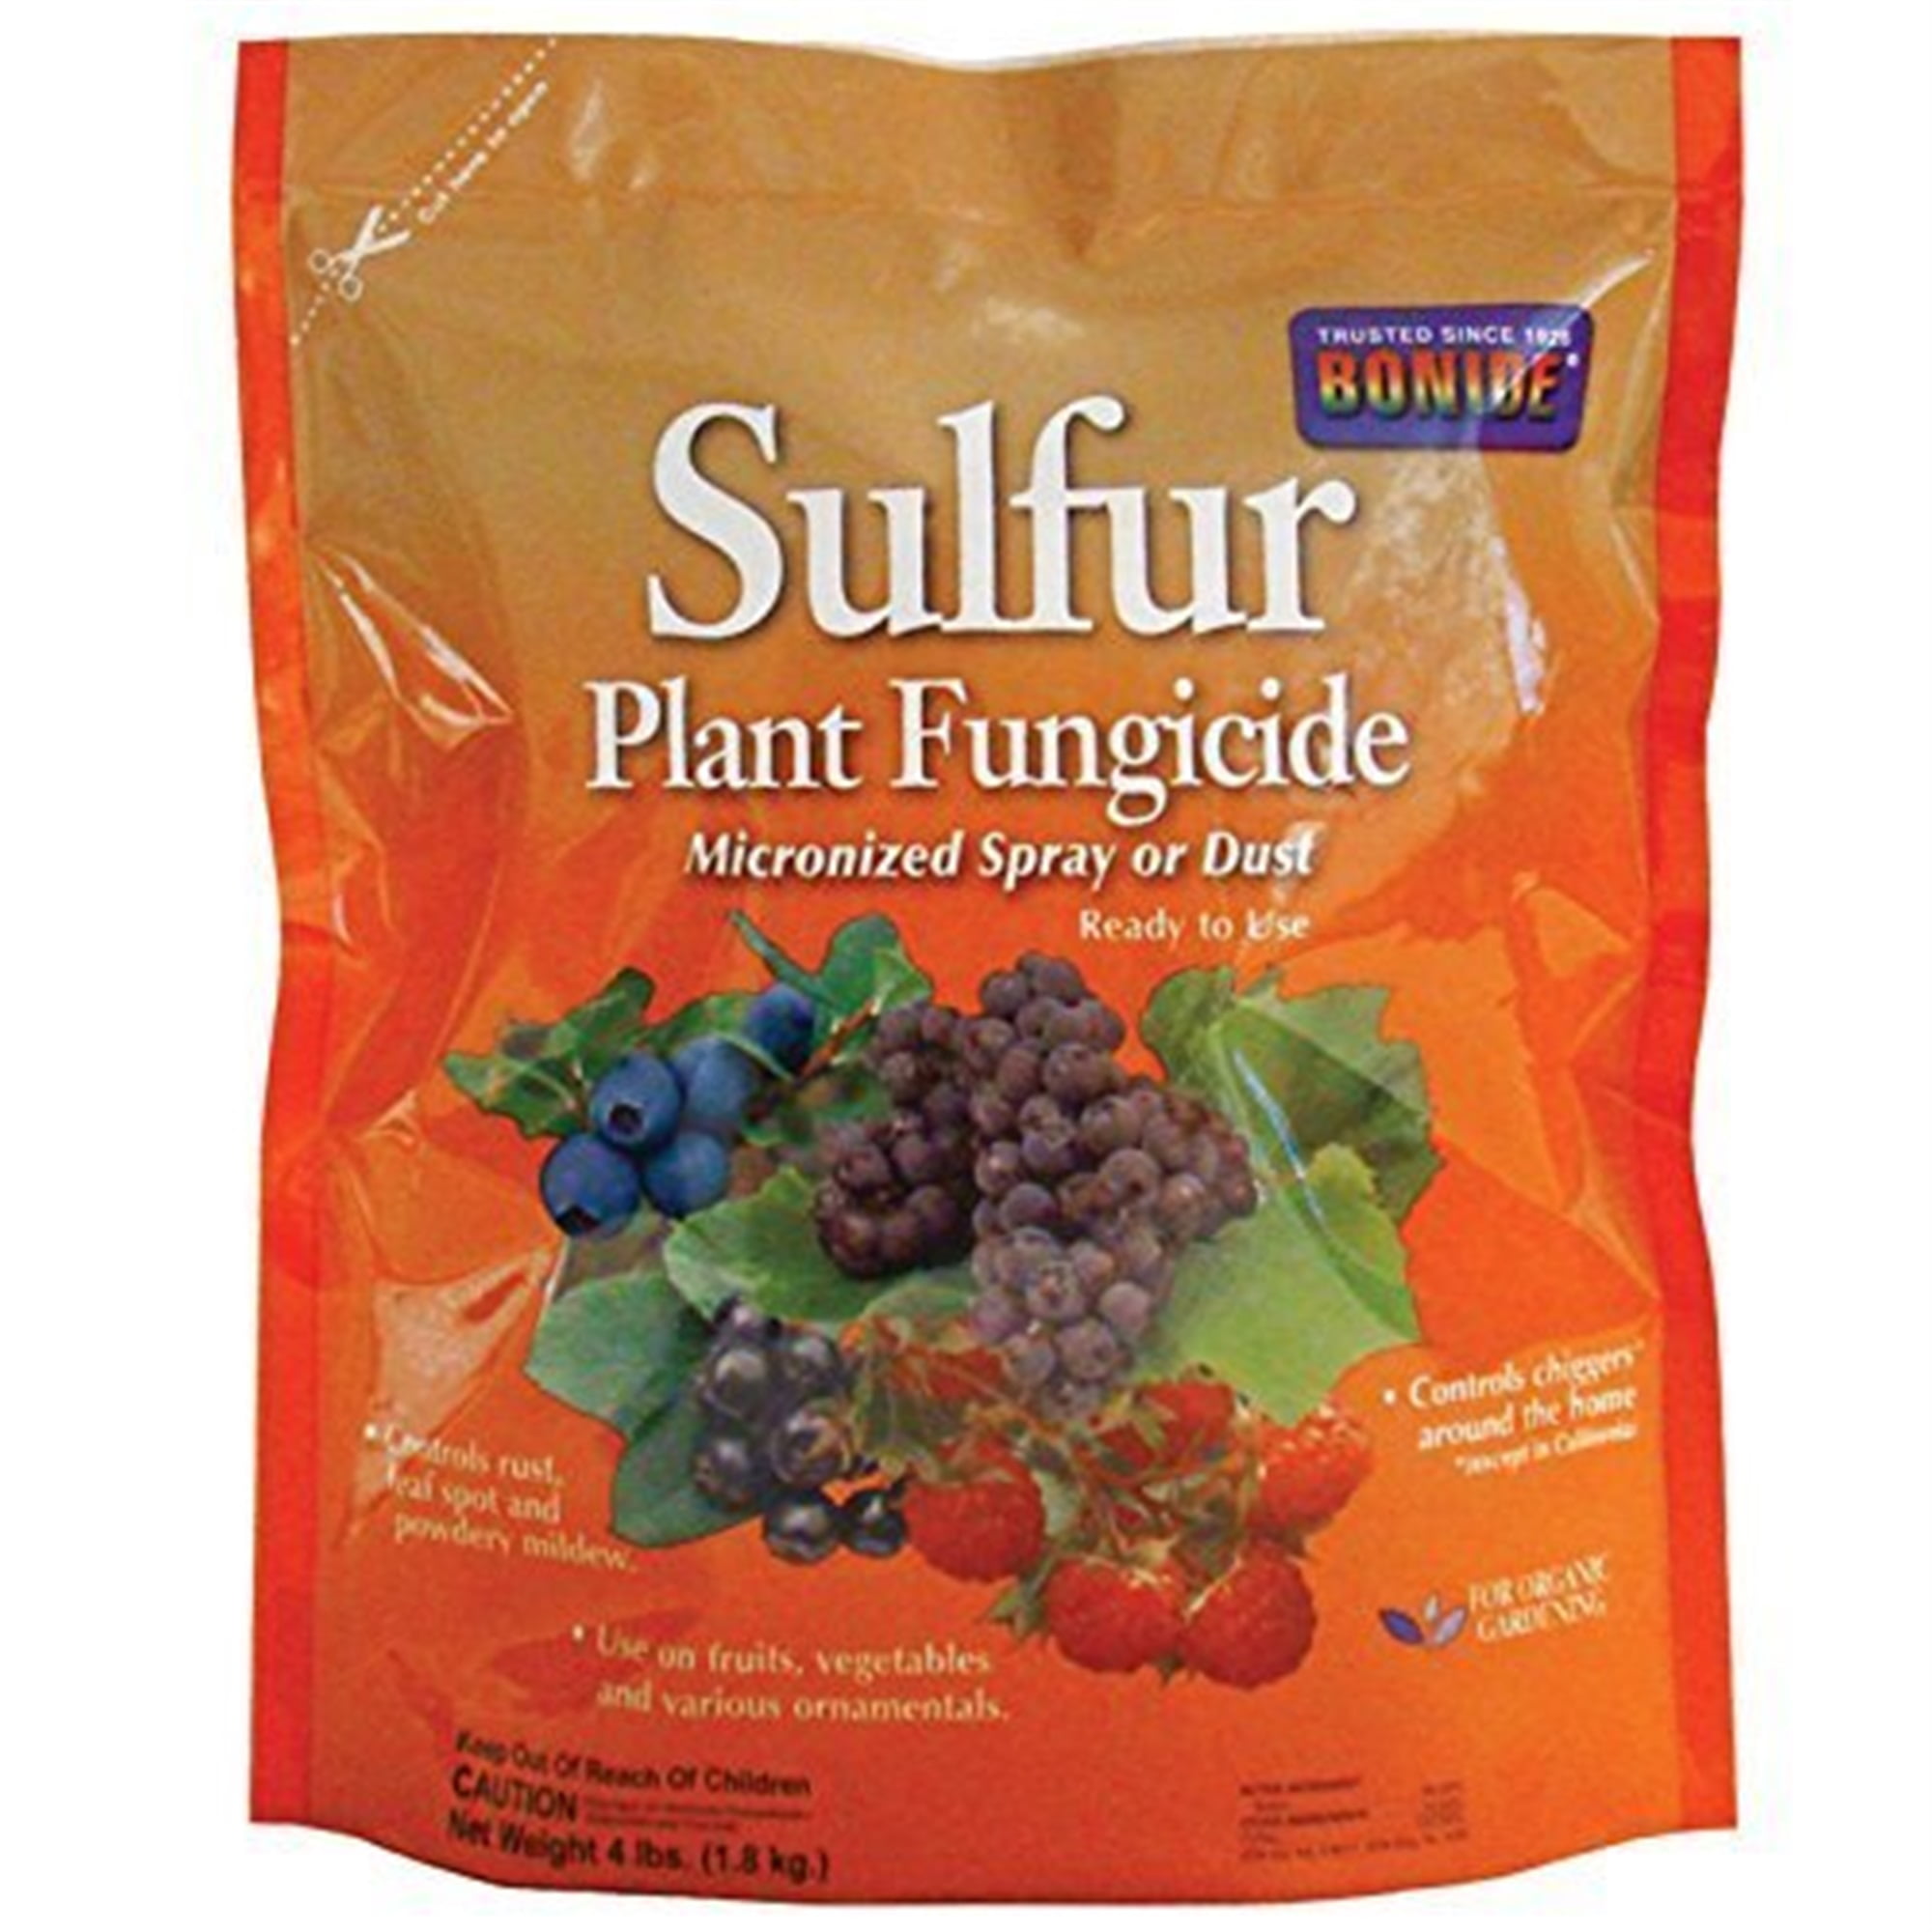 Picture of Bonide Product 7072085 4 lbs Fungicide Sulfur